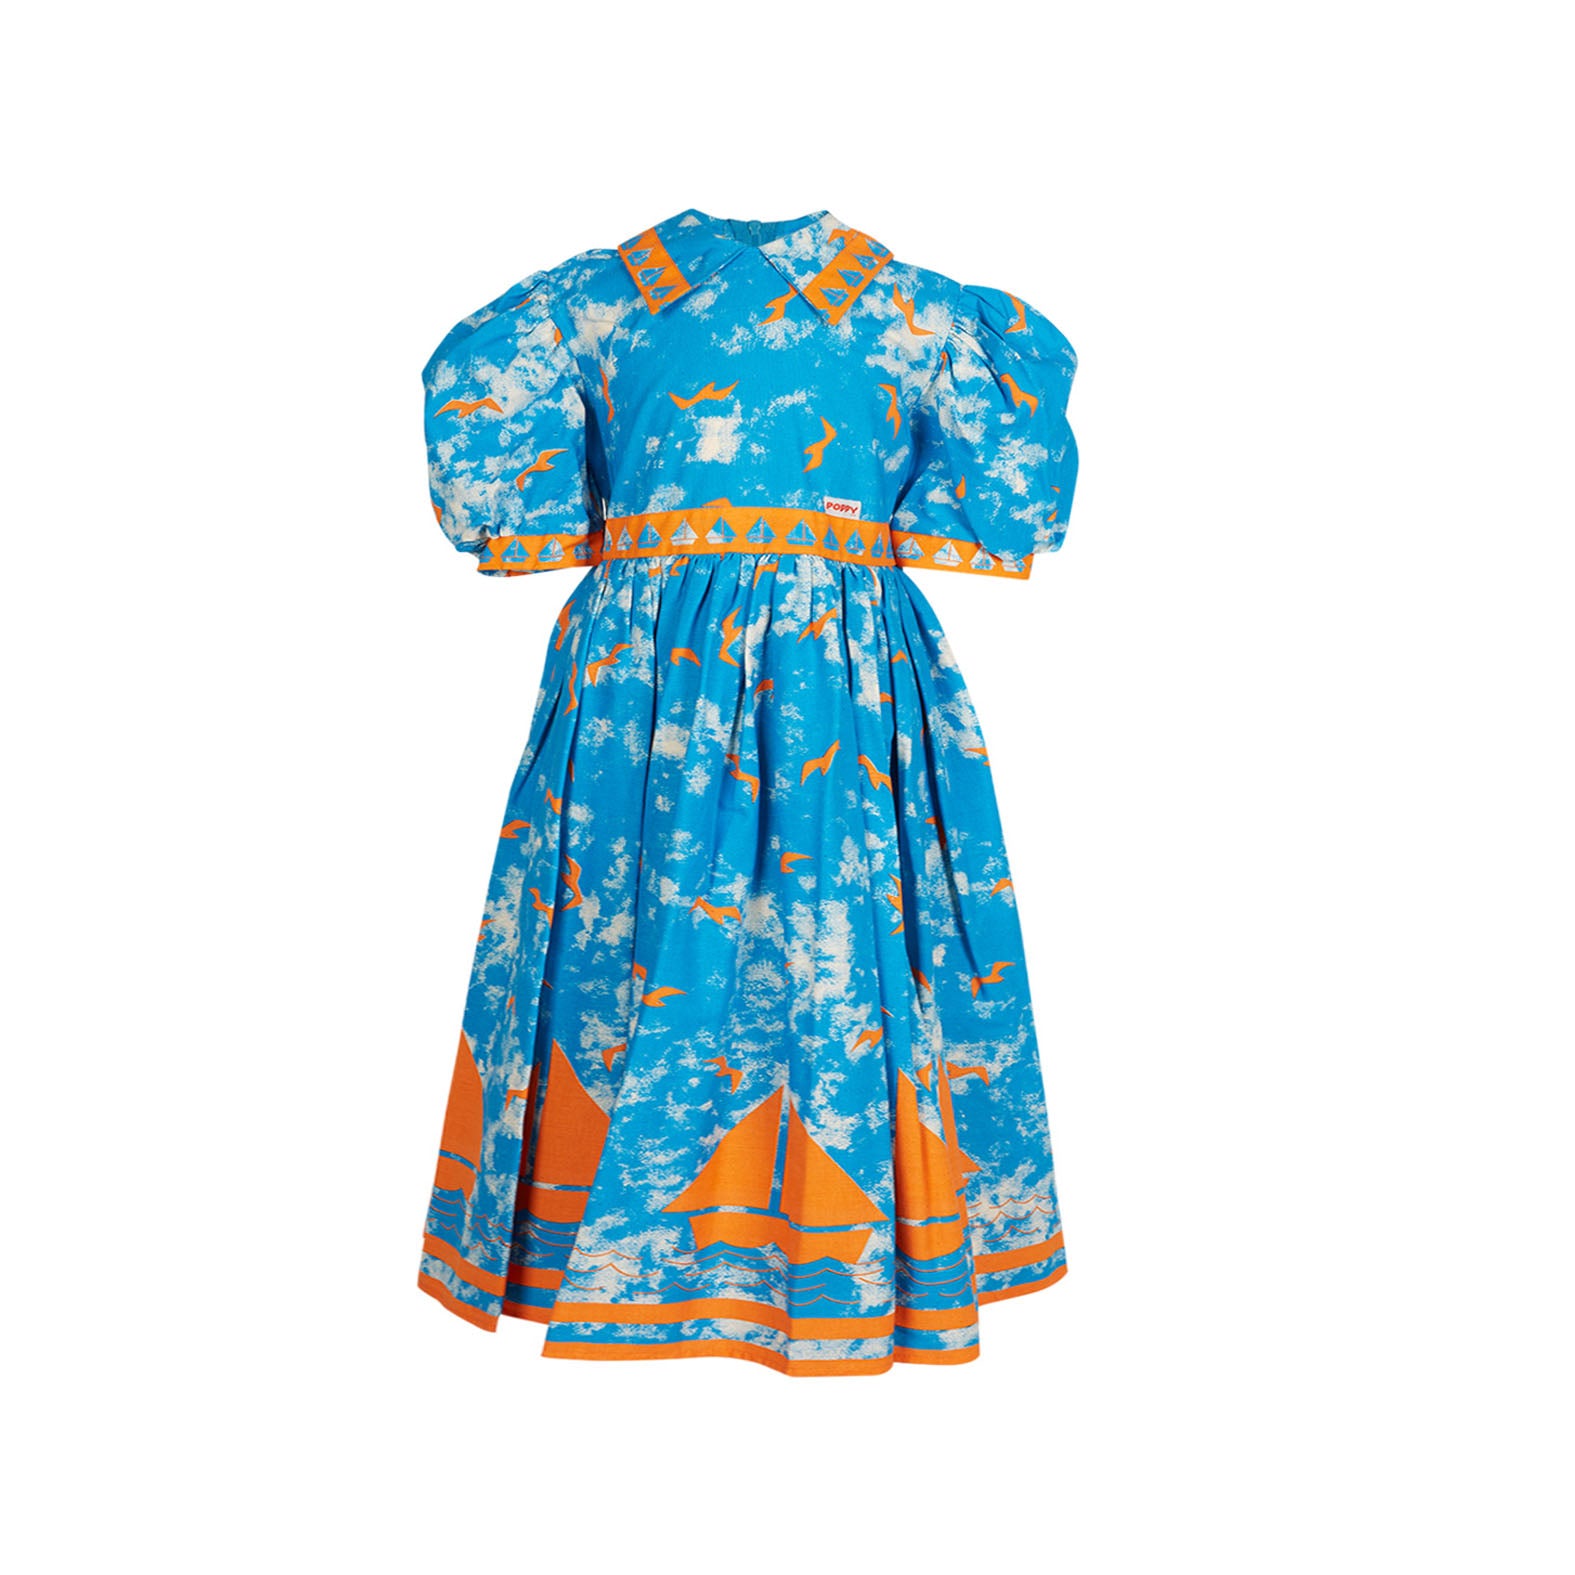 Archive Poppy - Charlie Dress - Blue Sailing Boats